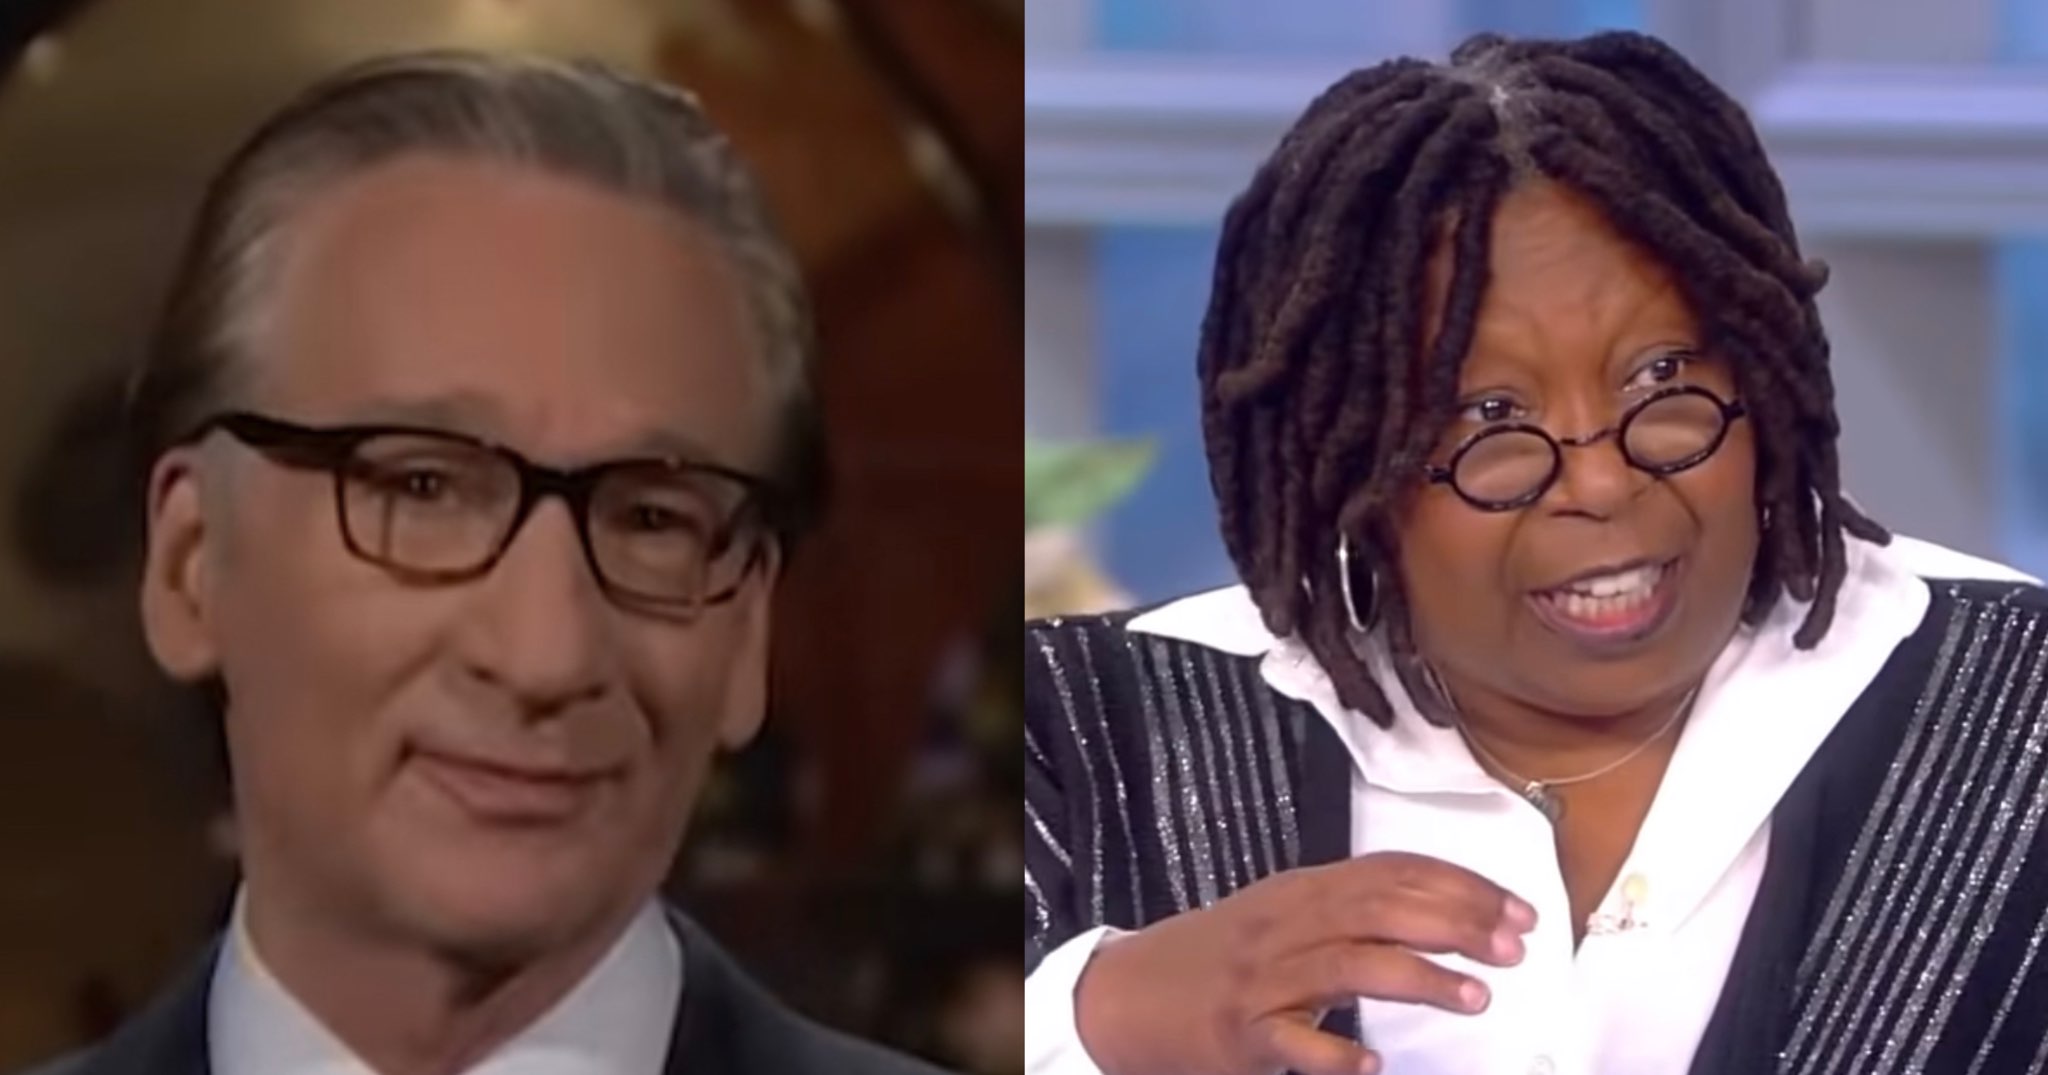 Even Bill Maher Thinks Whoopi is Off the Deep End Regarding 'Black